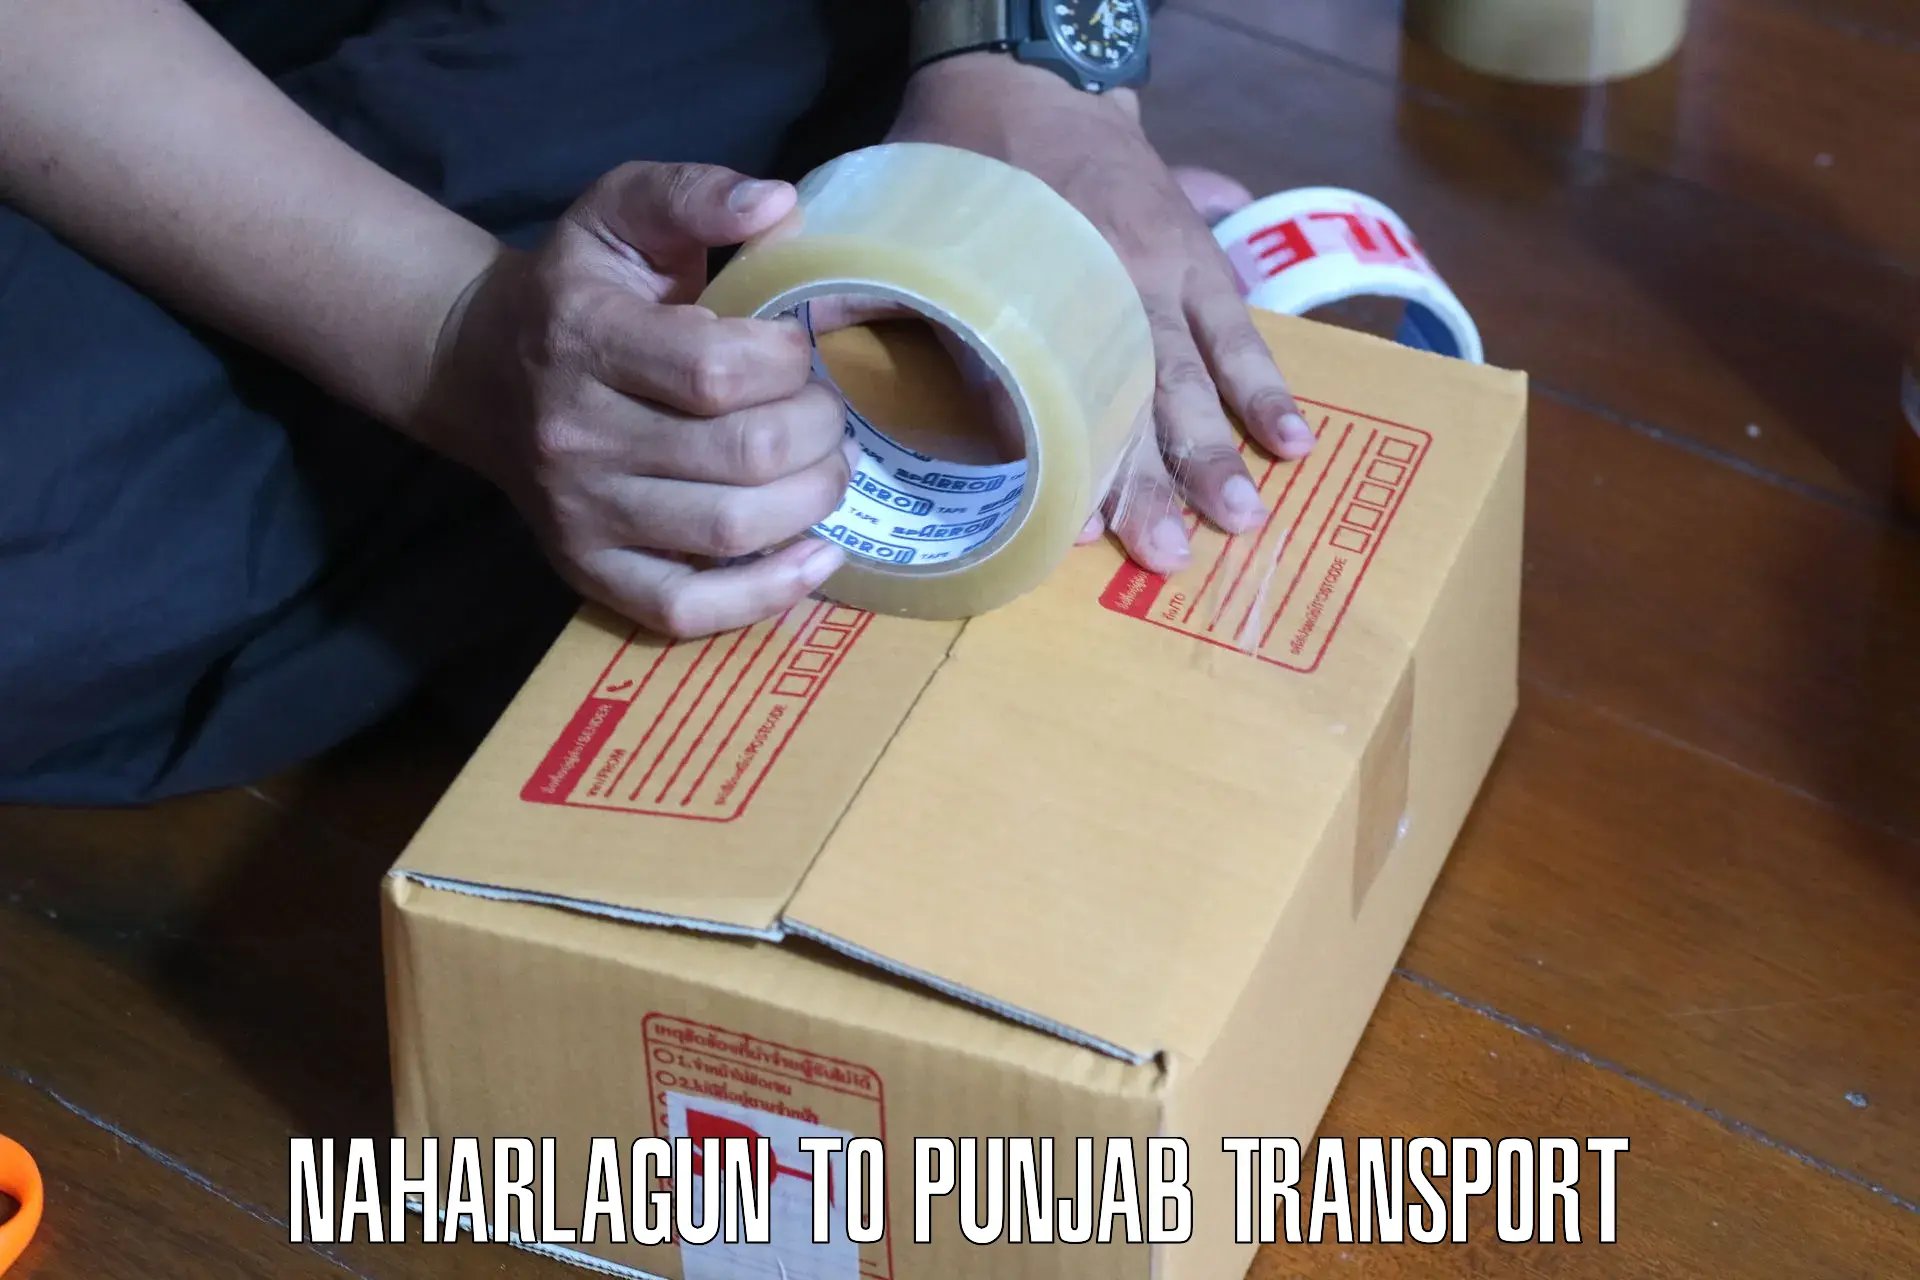 Air freight transport services Naharlagun to Sultanpur Lodhi